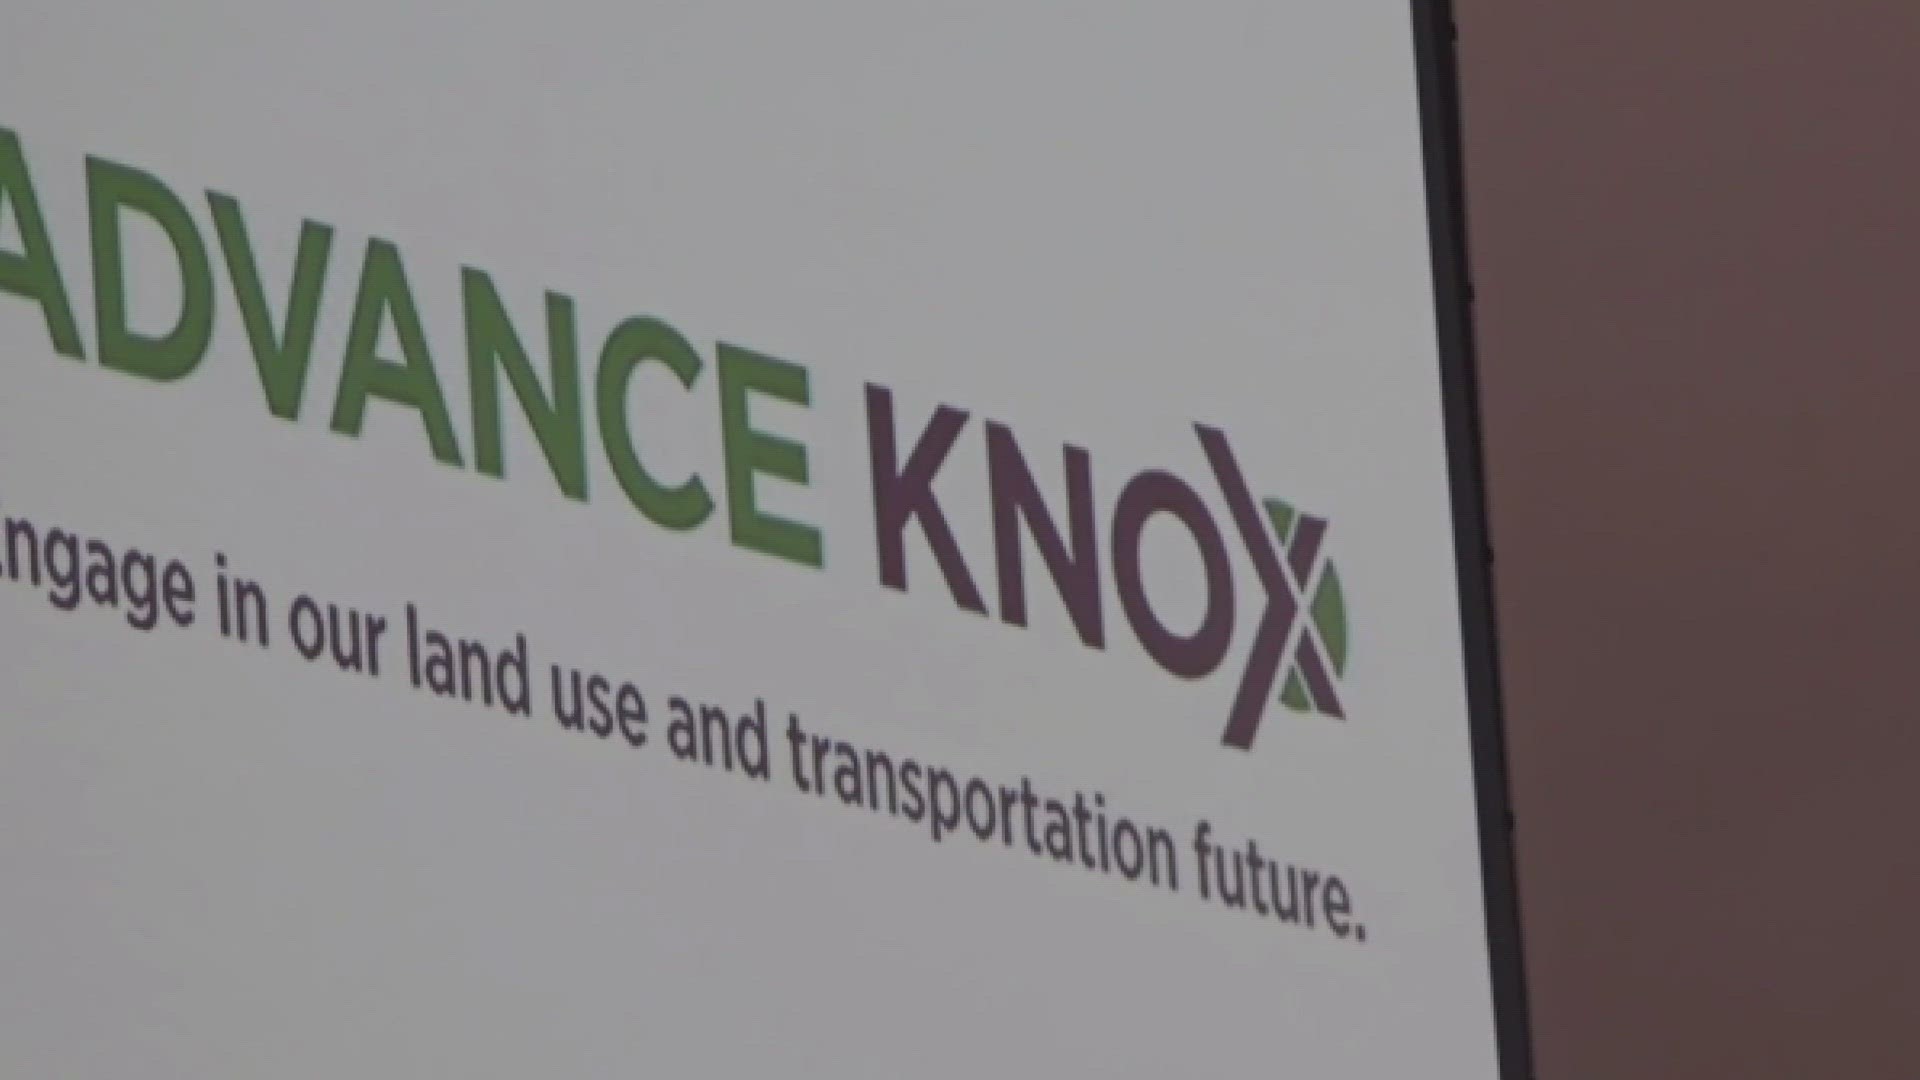 The Growth Policy Plan primarily informs how land is developed in Knox County, and could guide land use decisions for decades to come.